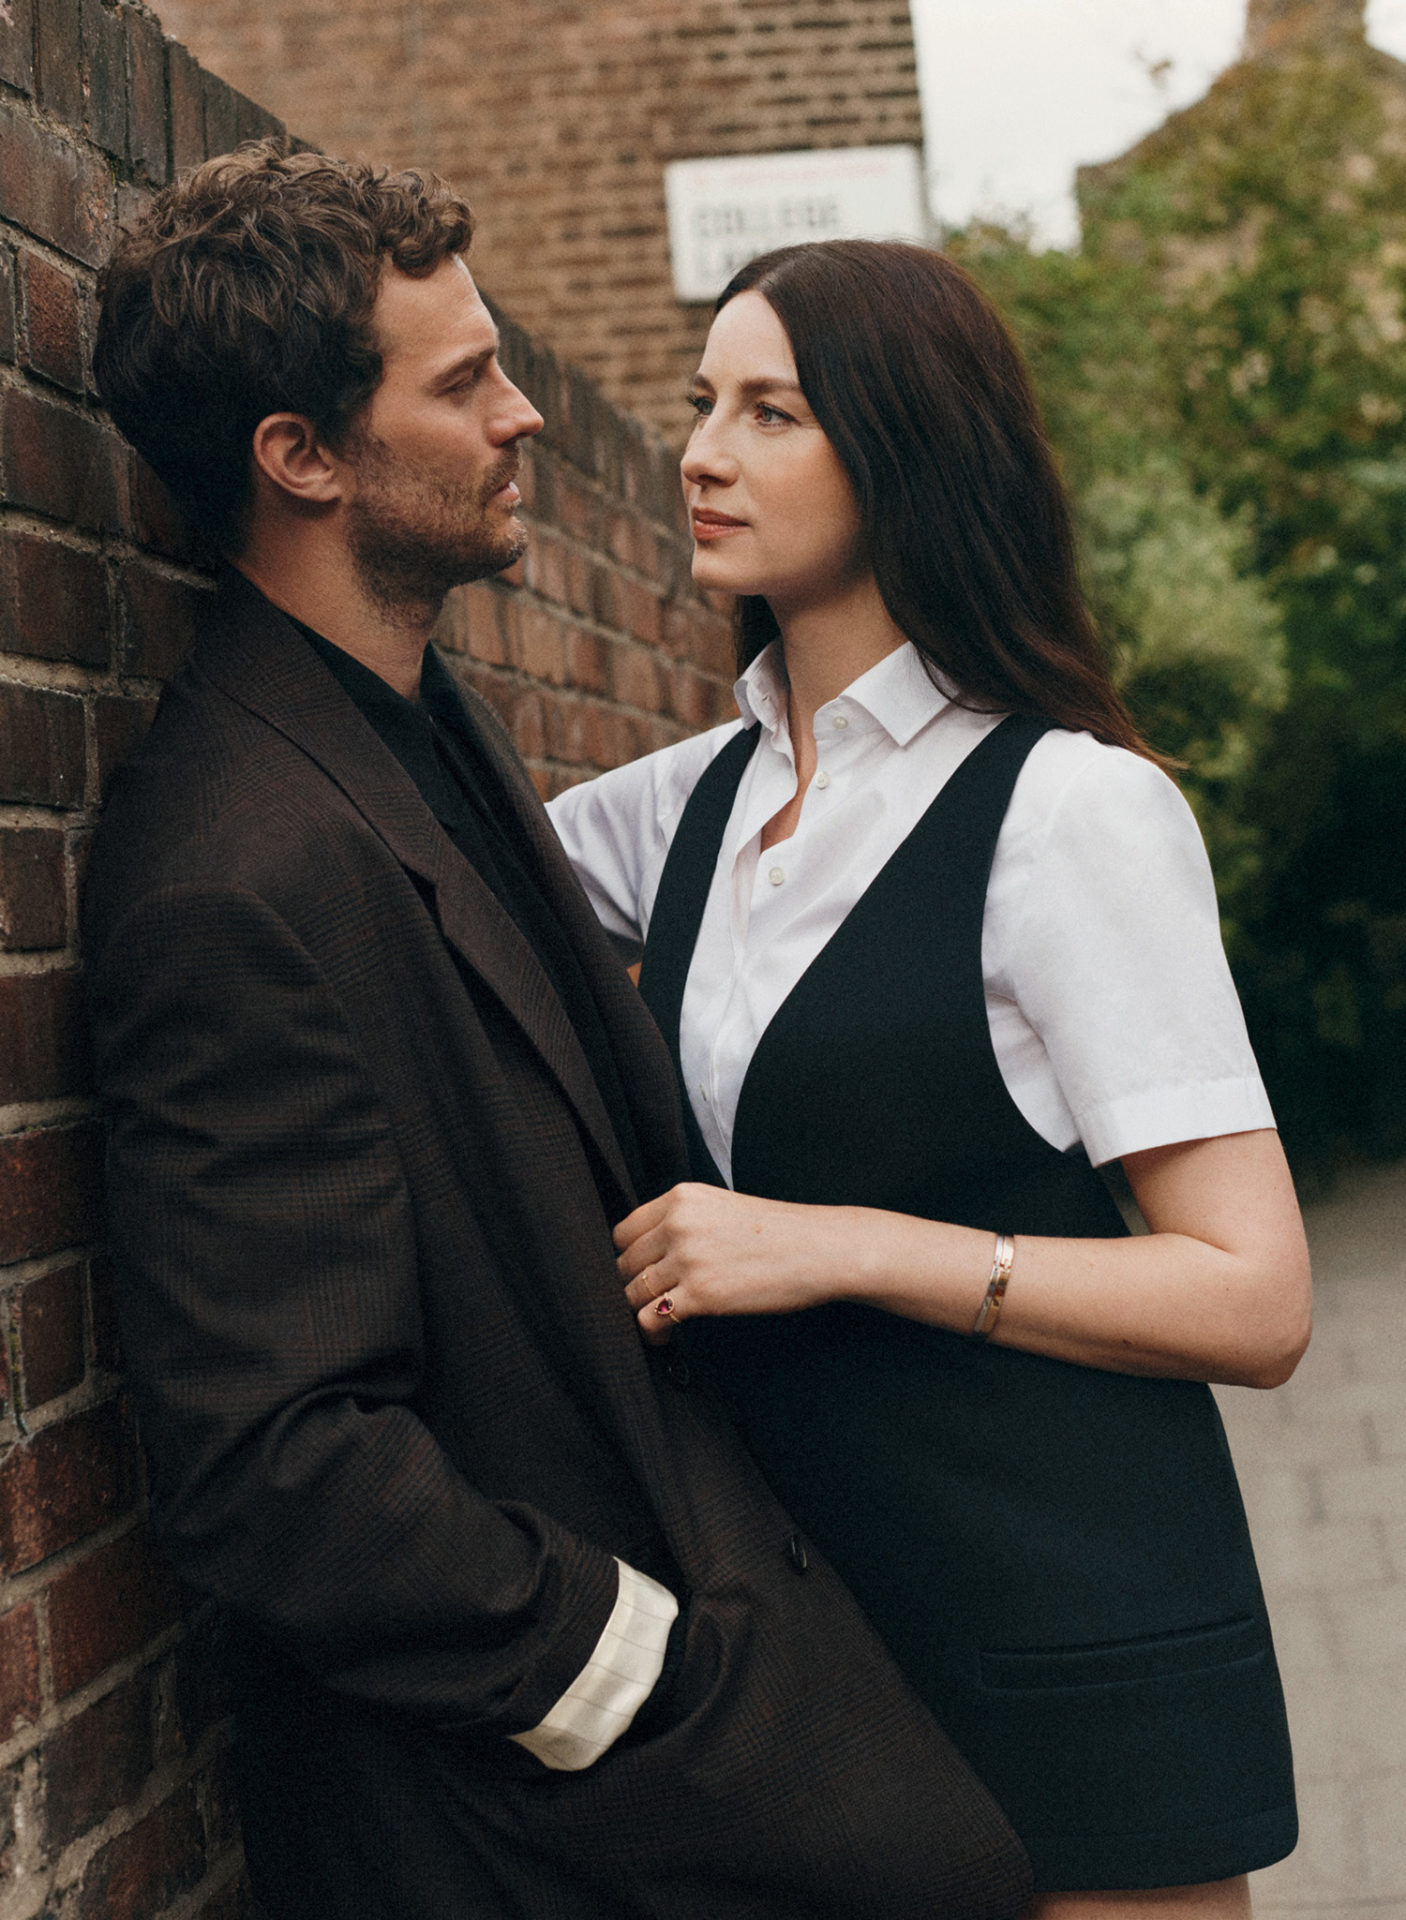 Jamie Dornan and Caitriona Balfe by Scott Trindle for British Vogue February 2022